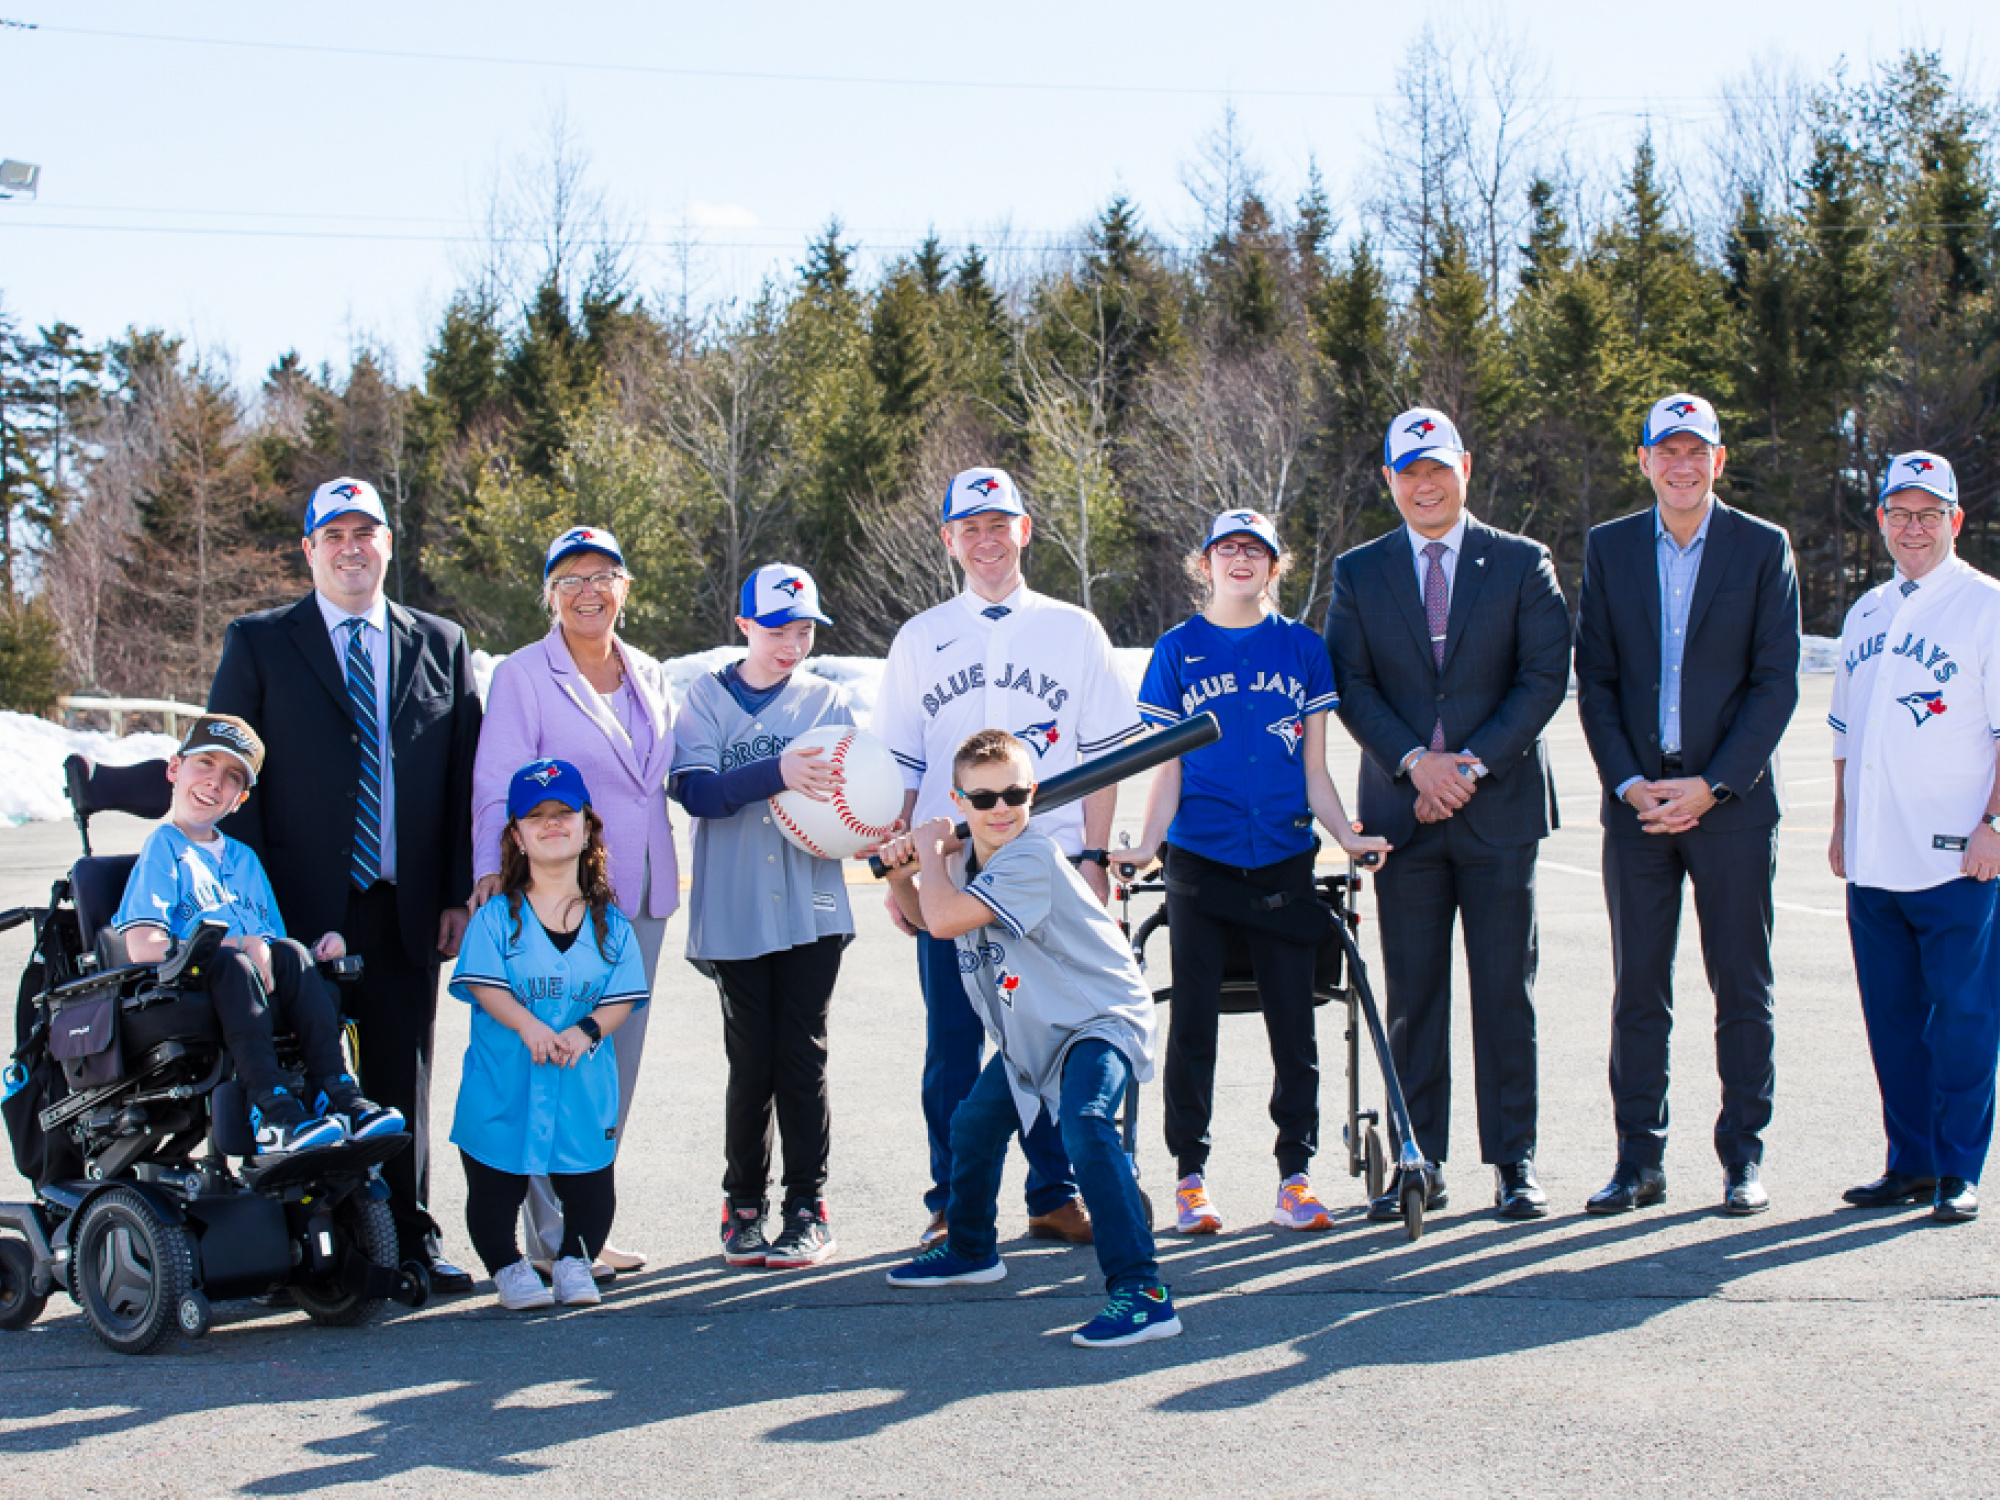 Young athletes from the Jays Cares Challenger Baseball program with (L-R): Randy Crouse, Challenger Baseball National Coordinator; Barbara Adams, Minister of Seniors and Long Term Care; Colton LeBlanc, Minister of Service Nova Scotia; Stan Cho, Ontario Minister of Long Term Care; James Dodds, Chair, Jays Cares Foundation’s board of directors; and Doug Downey, Ontario Attorney General